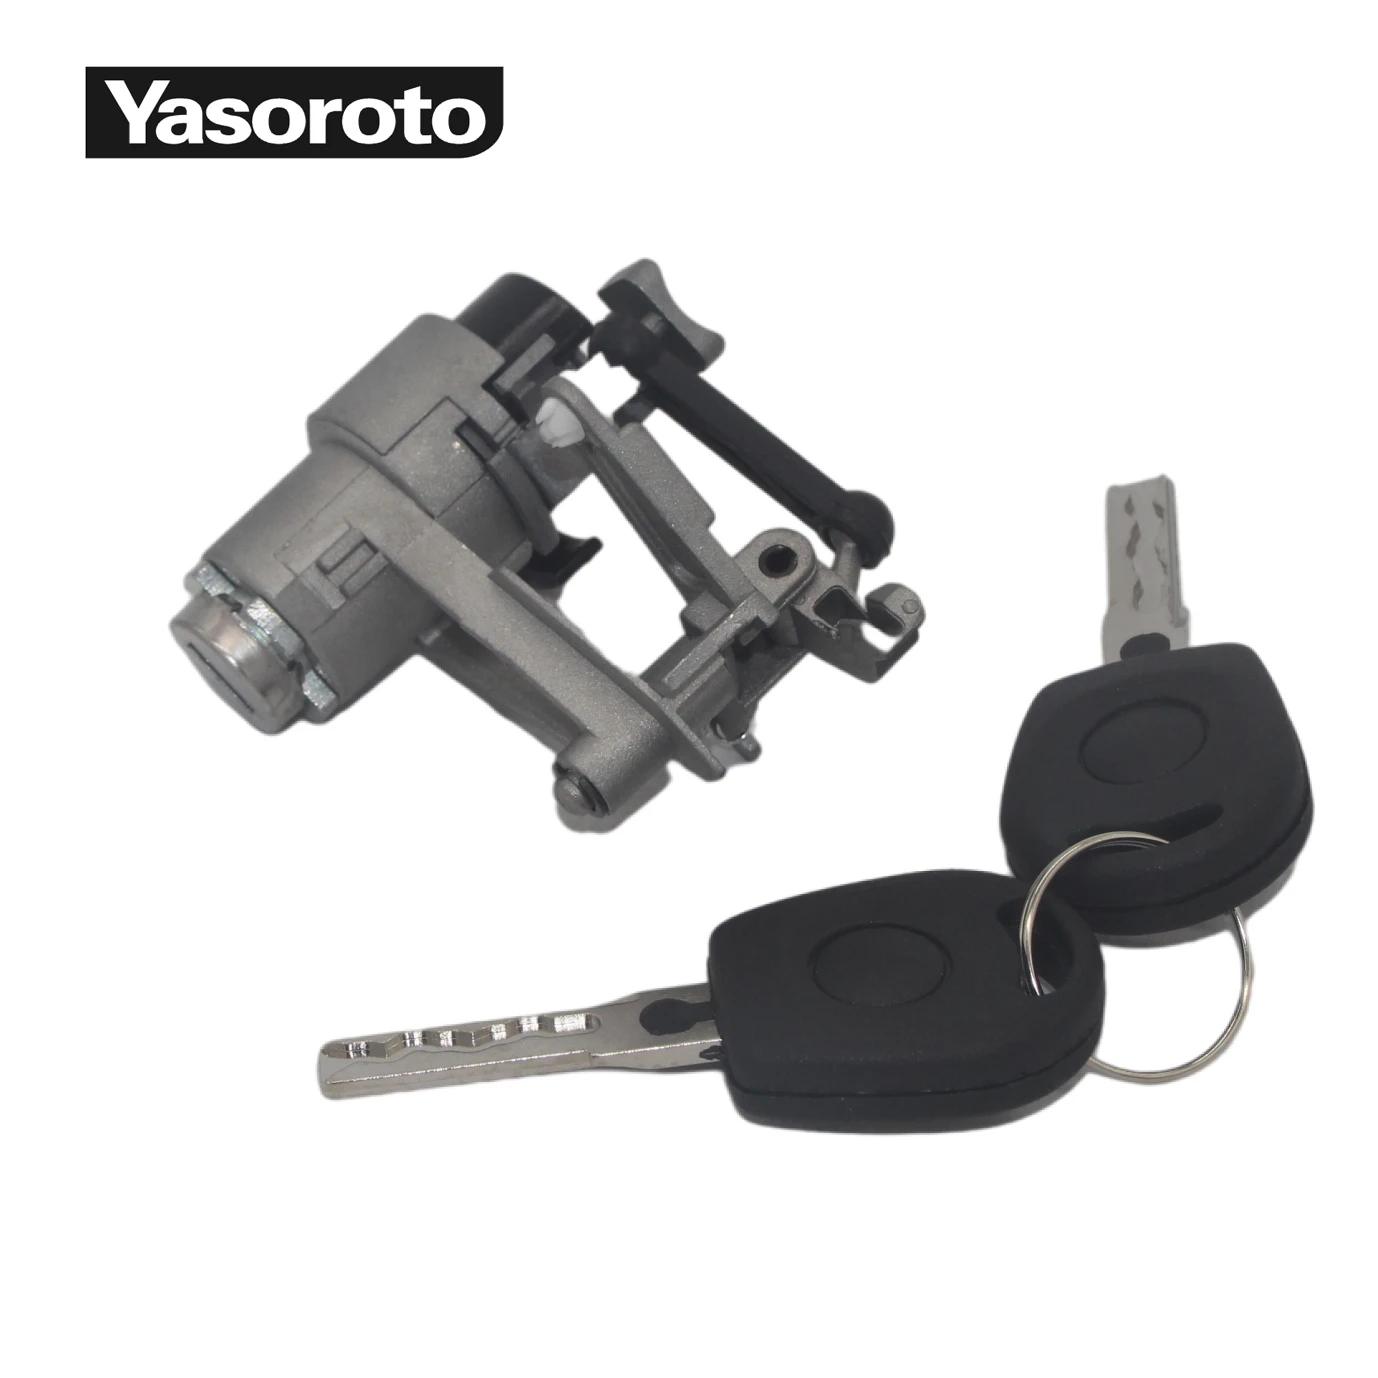 

Tailgate Trunk Boot Lock Cylinder For Volkswagen Golf GIV Lupo Seat Arosa 1997-2006 1J6827297G